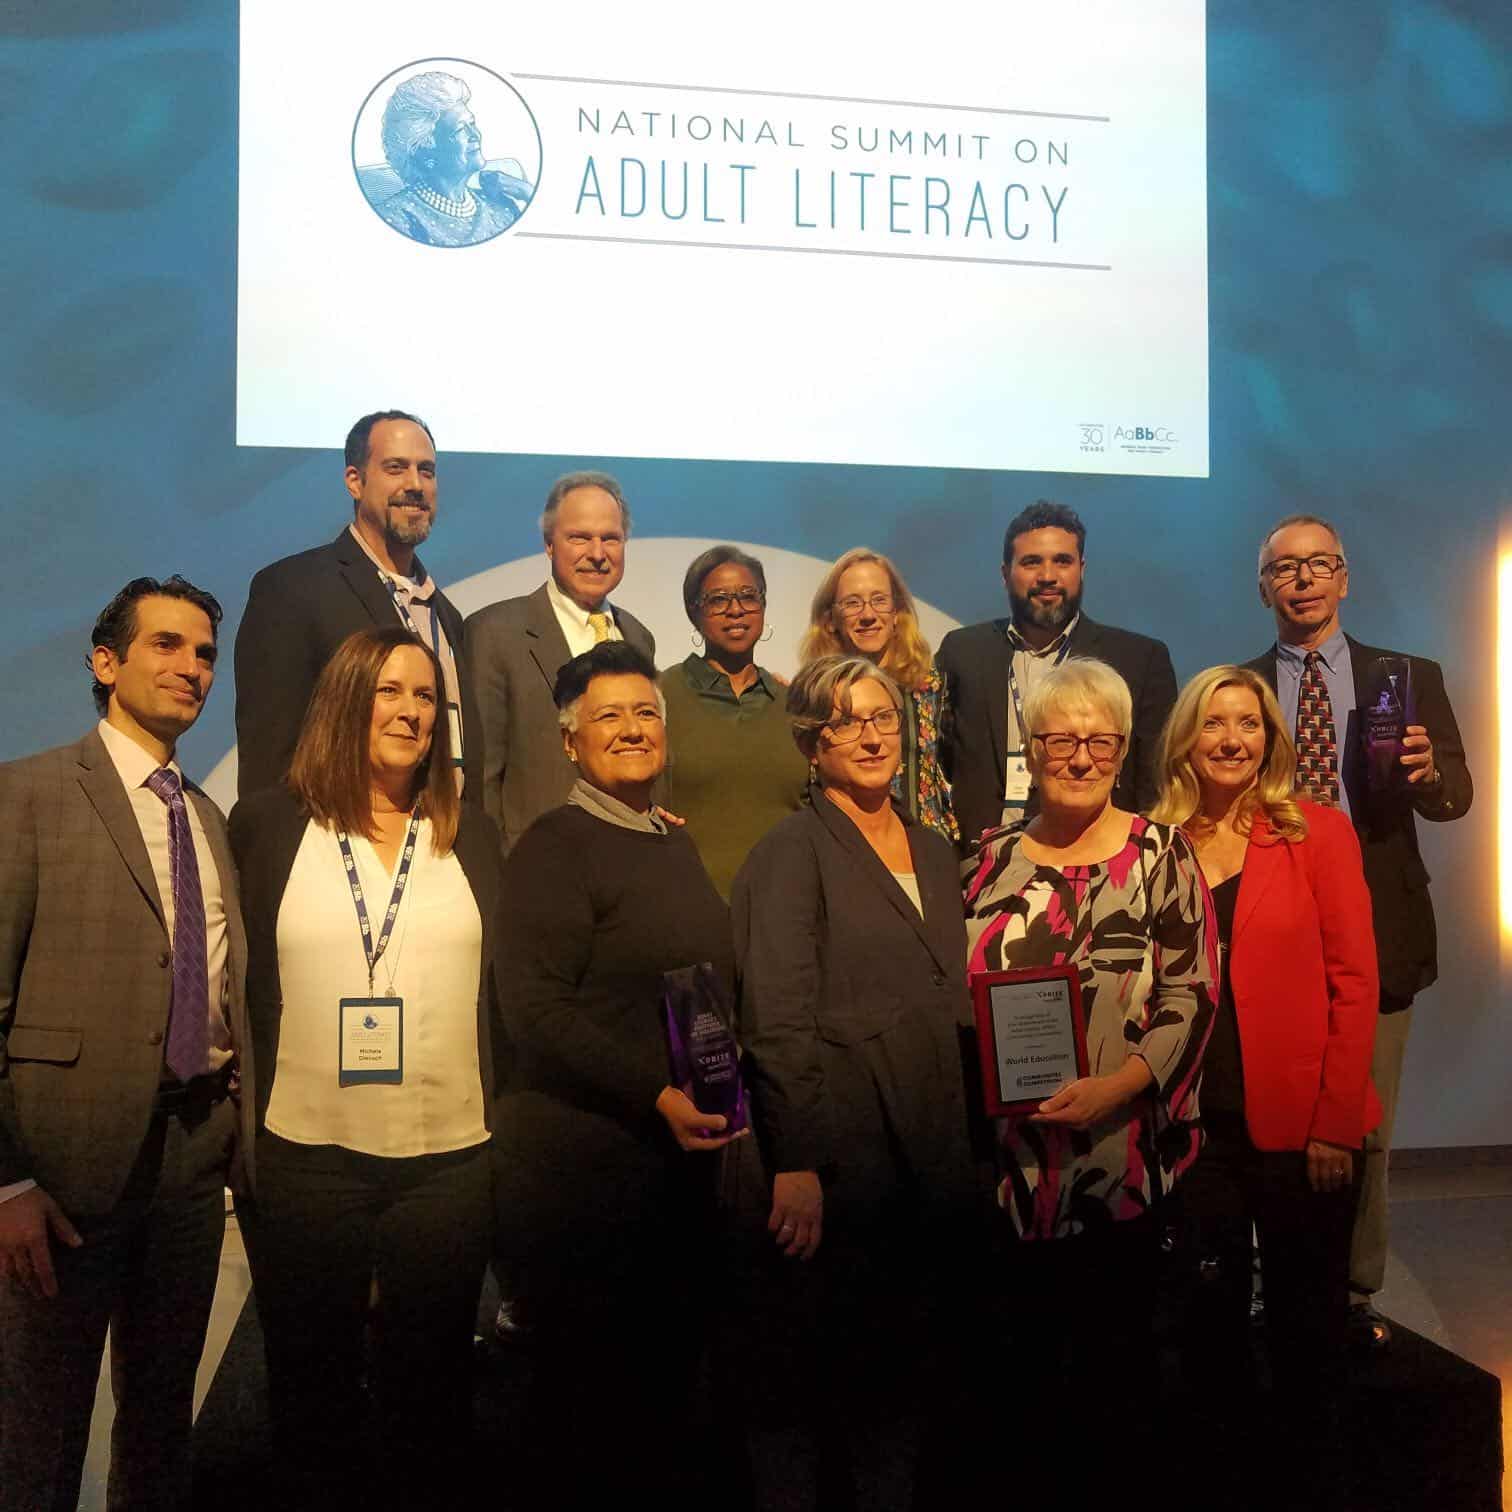 Team WorldEd Named an Achievement Winner in the Adult Literacy XPRIZE Communities Competition